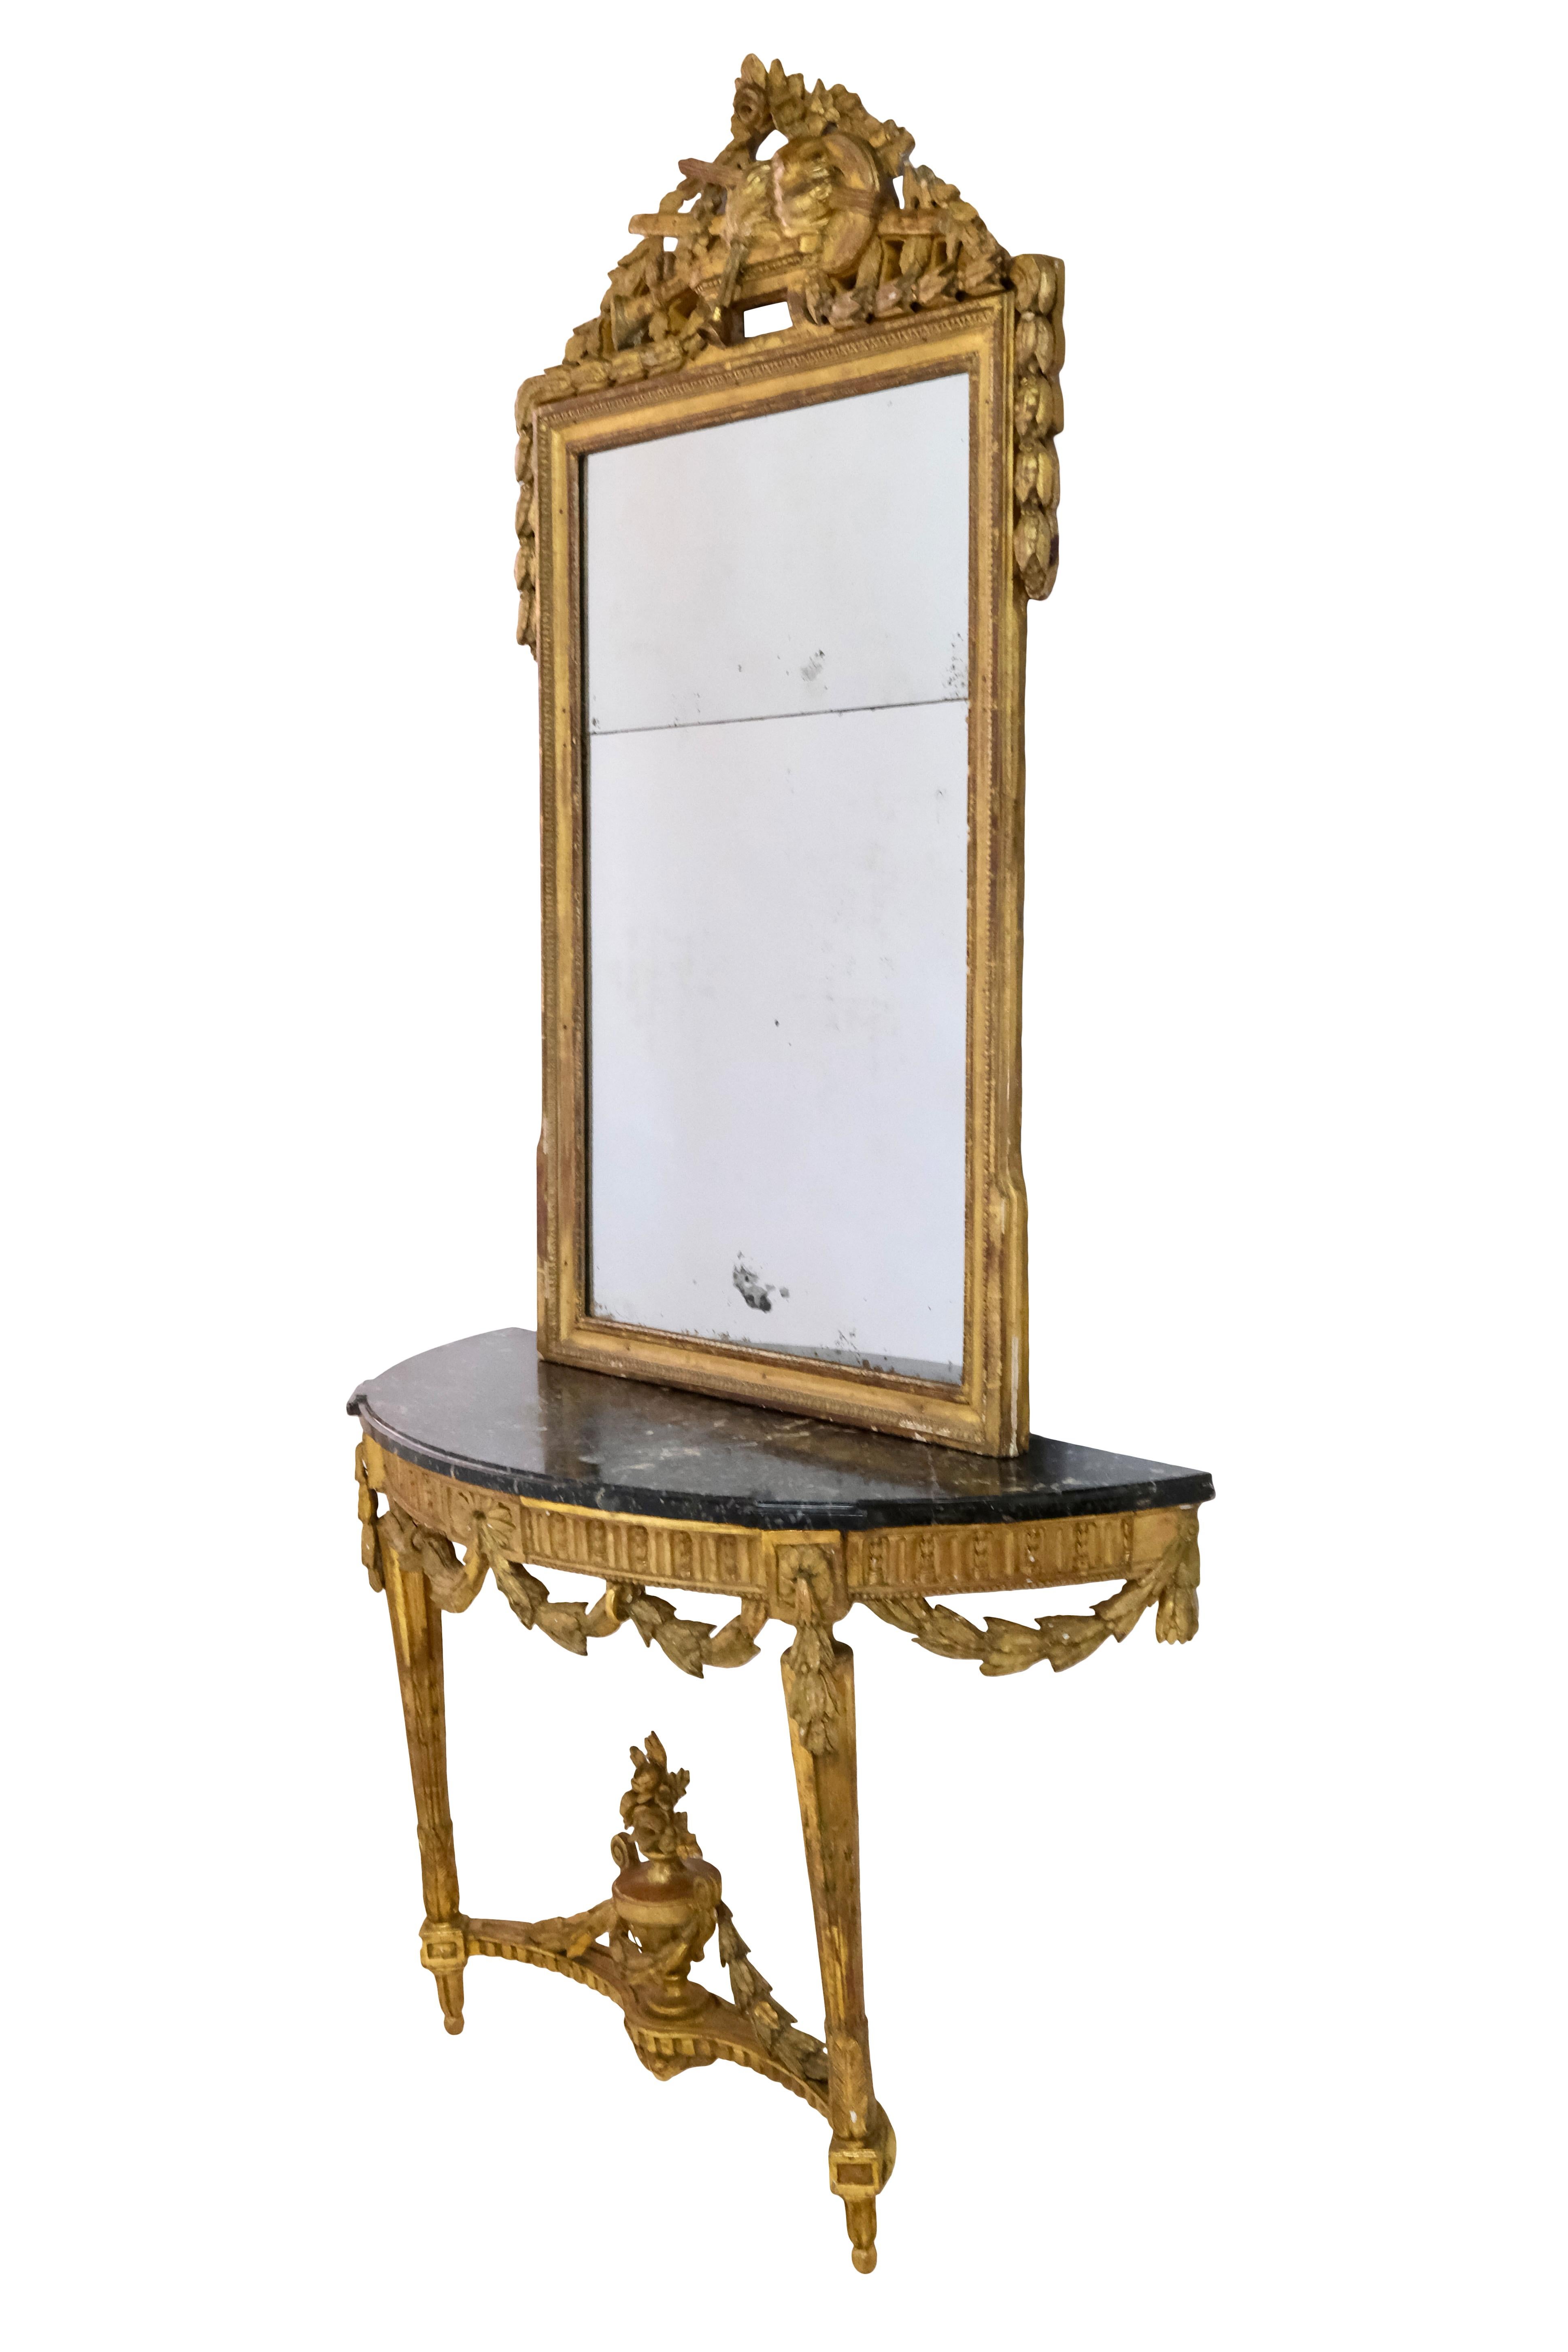 Console Table with Mirror

detailed ornaments 
wood, gold leaf 
marble 
original mirror with blind spots 

Louis XVI (also: Louis-seize), 
France, Mid 18th Century 

Mirror dimensions:
Width: 92 cm
Height: 156 cm

Console dimensions:
Width: 129